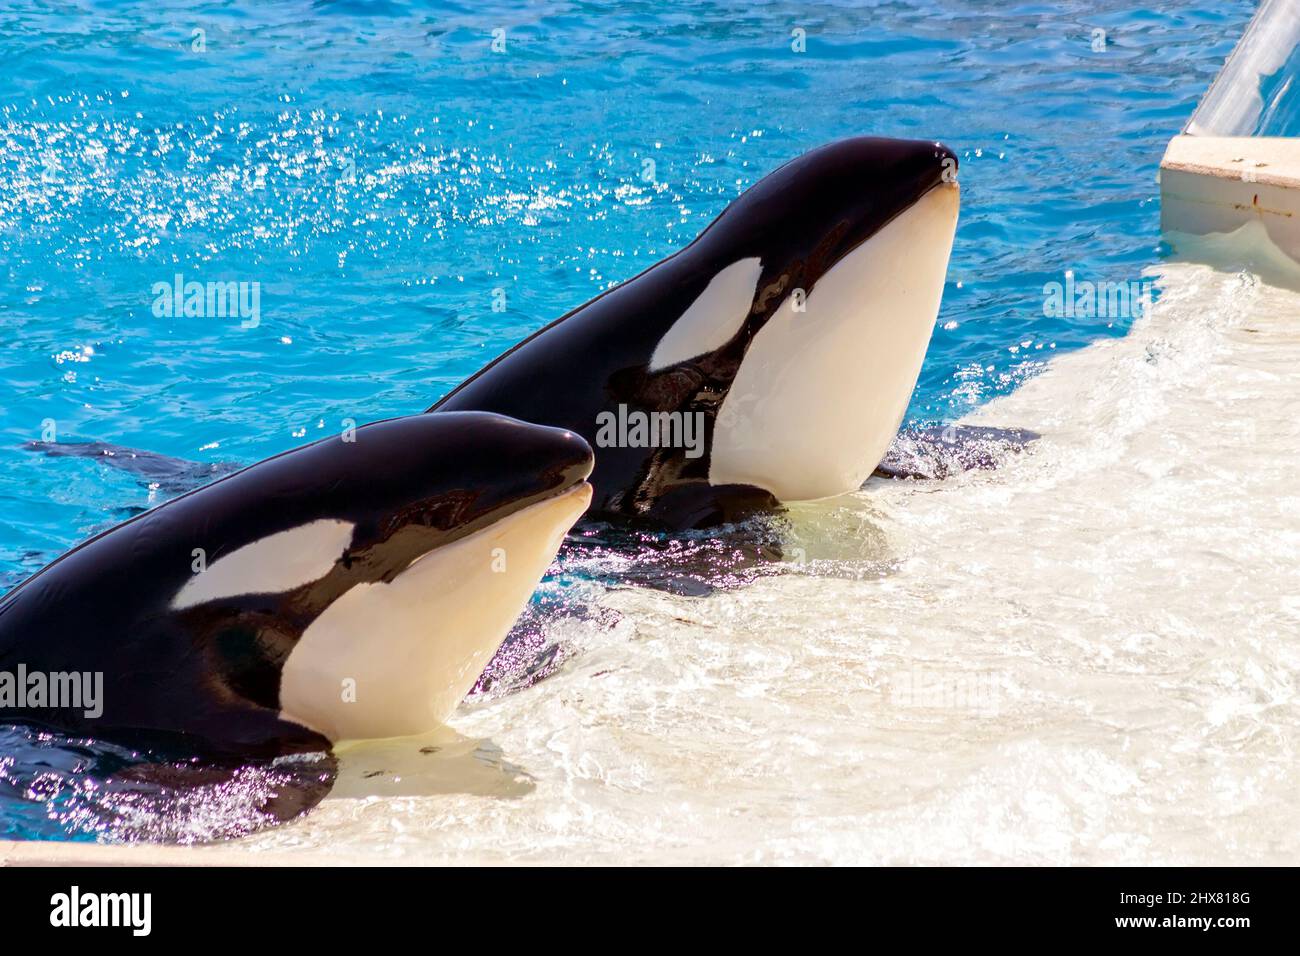 Two killer whales in water Stock Photo